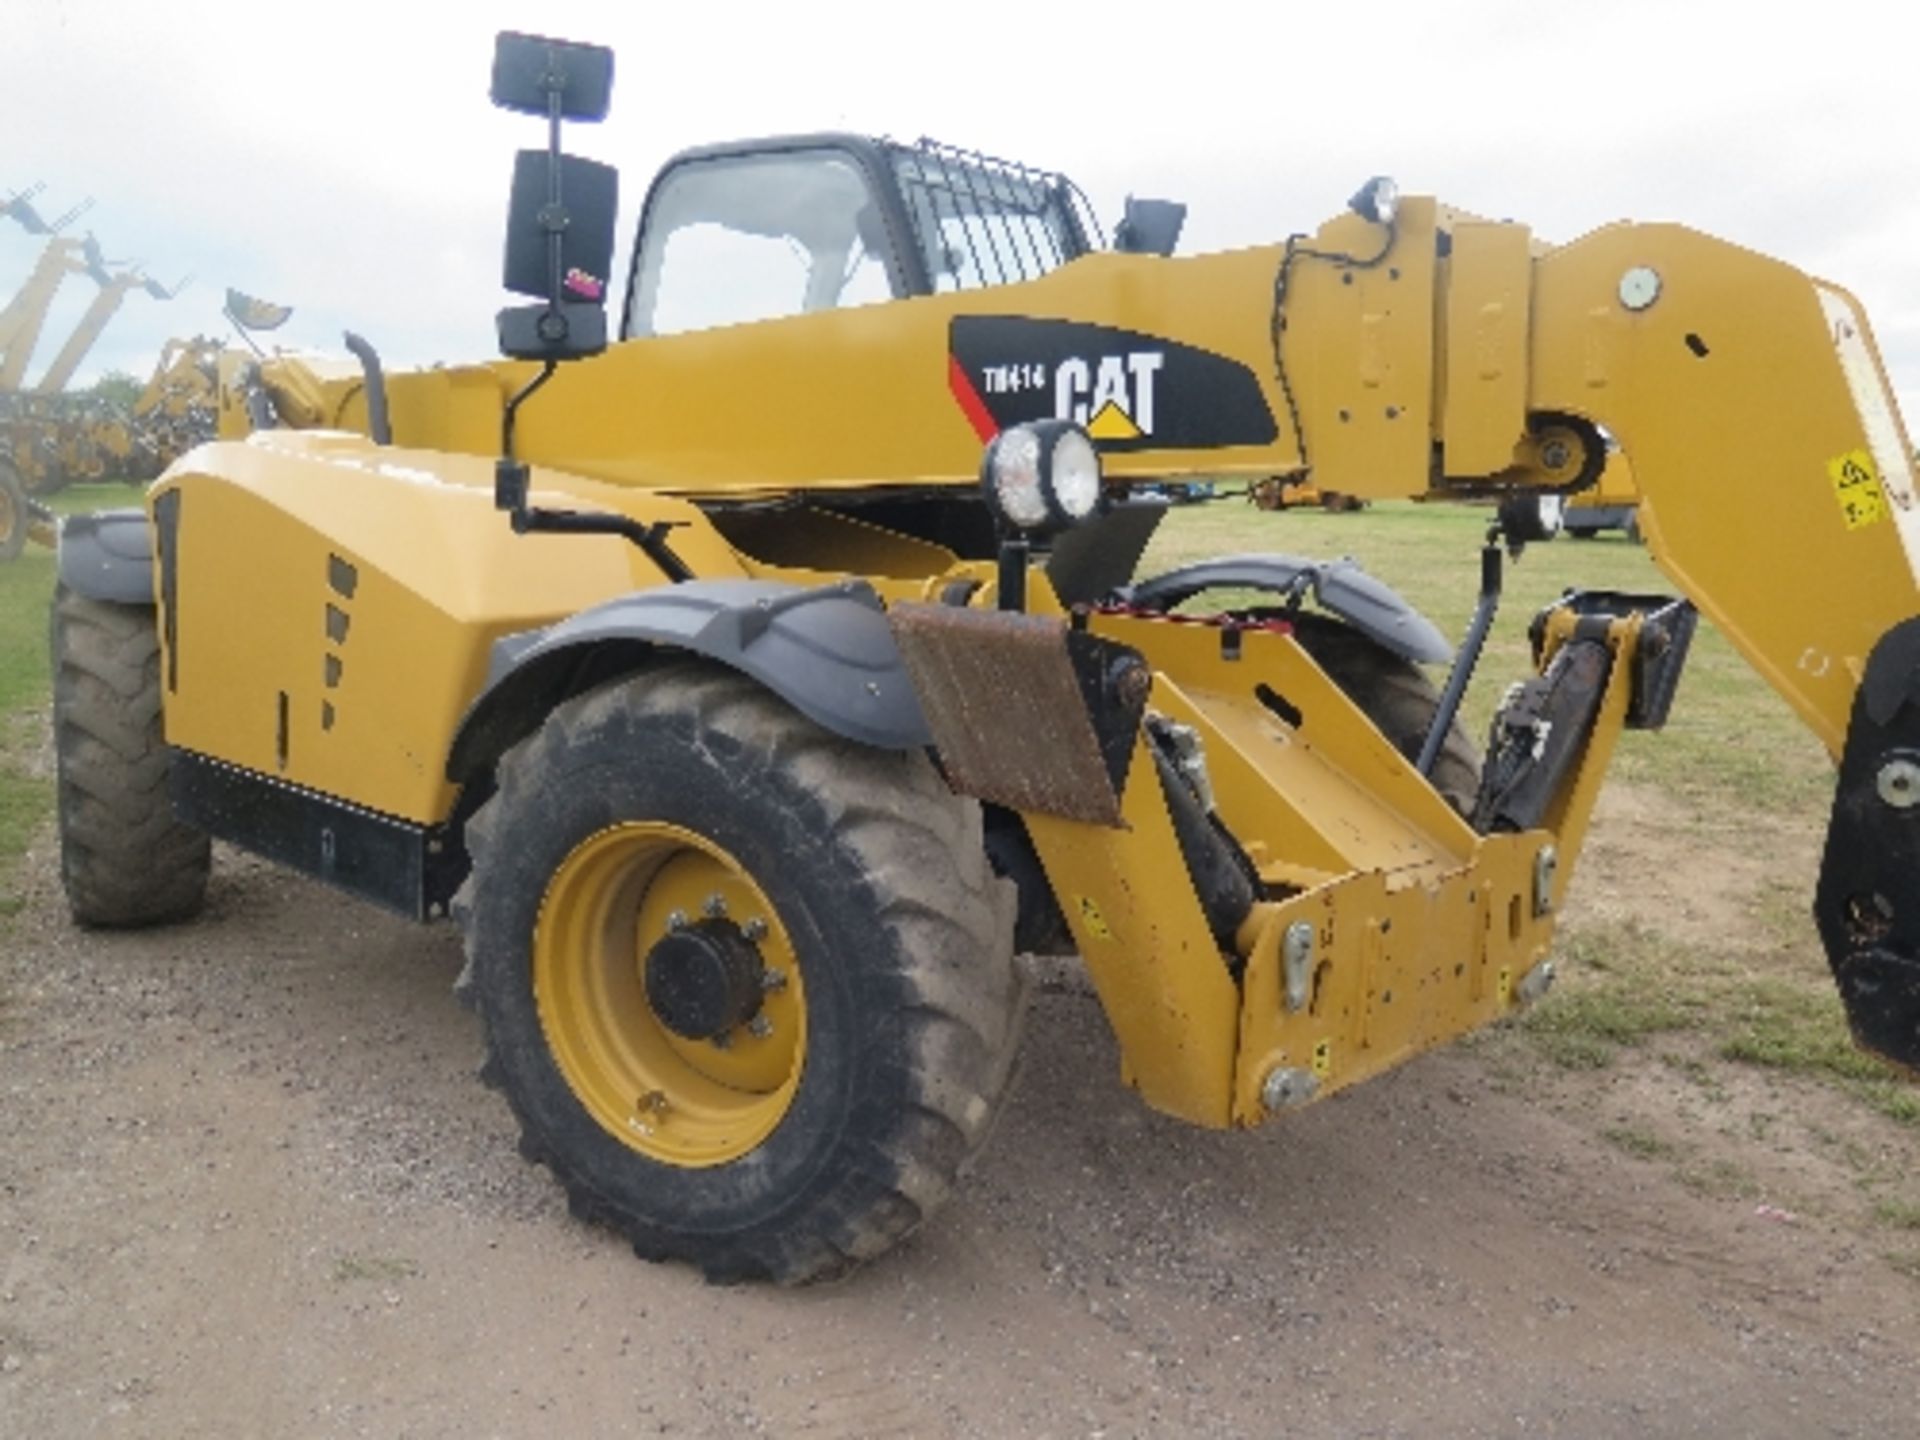 Caterpillar TH414STDQ telehandler 2347 hrs 2013 TBZ00905
This lot is included by kind permission of - Image 4 of 7